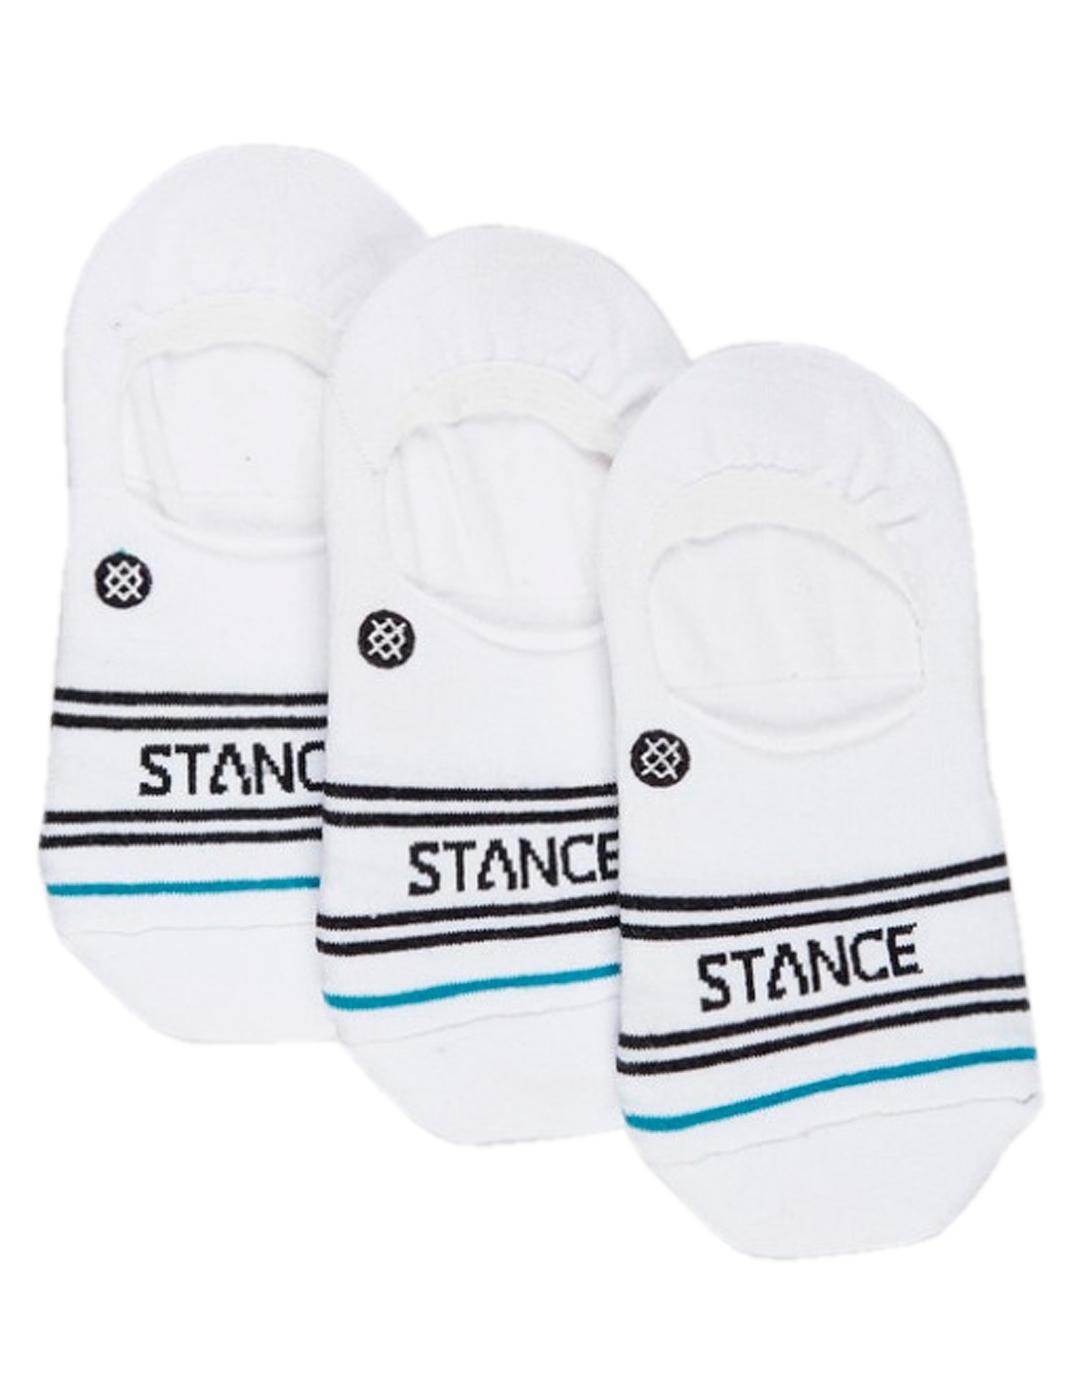 CALCETIN STANCE BASIC 3 PACK NO SHOW, BLANCO